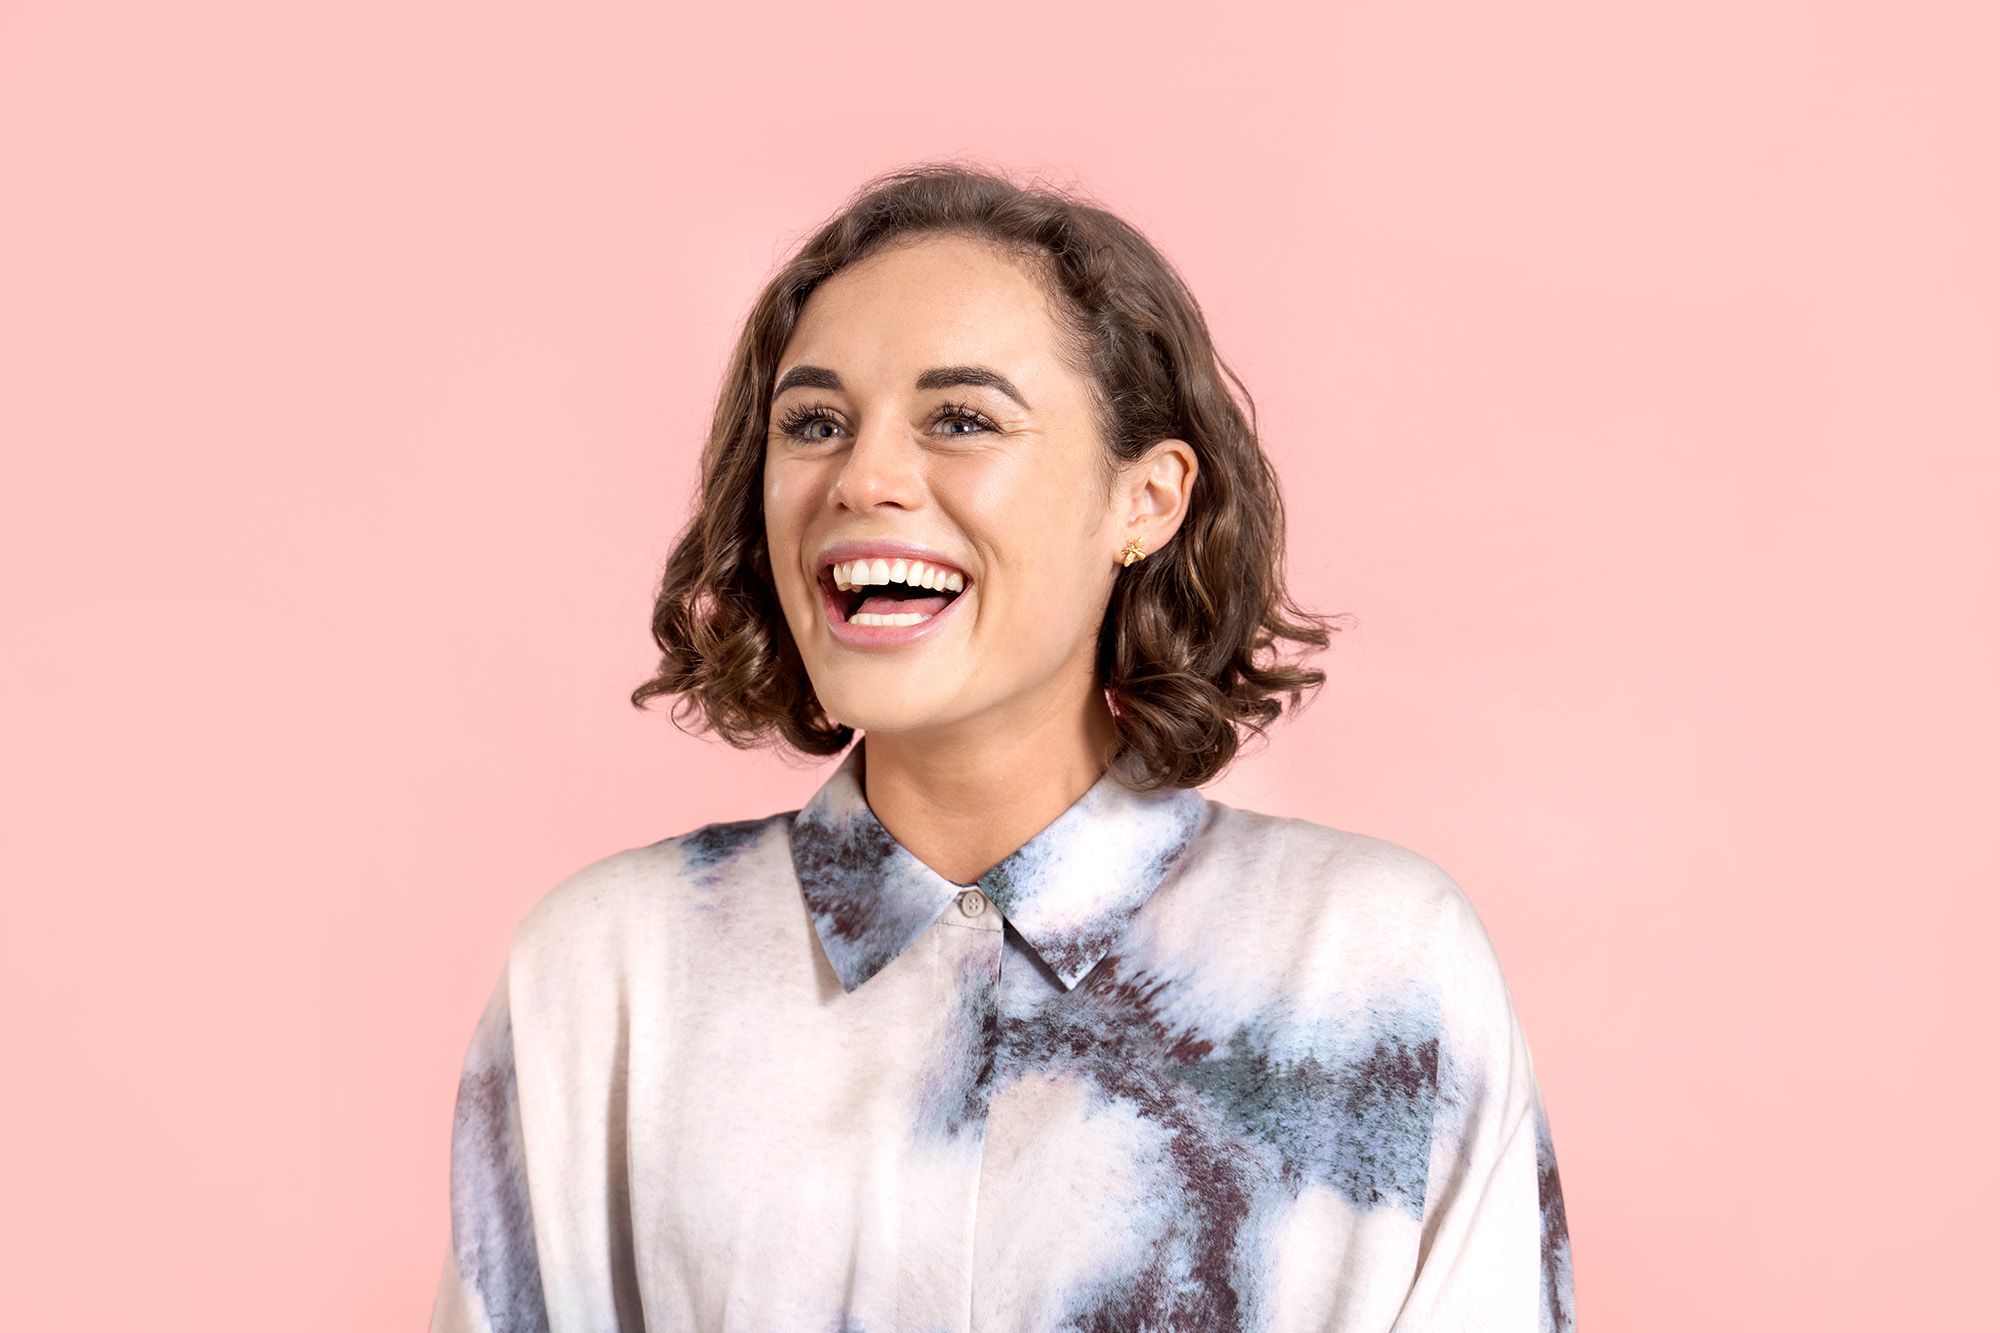 Sophie Jones has brown curly hair and green eyes. She laughs as she stands in front of a light pink background.